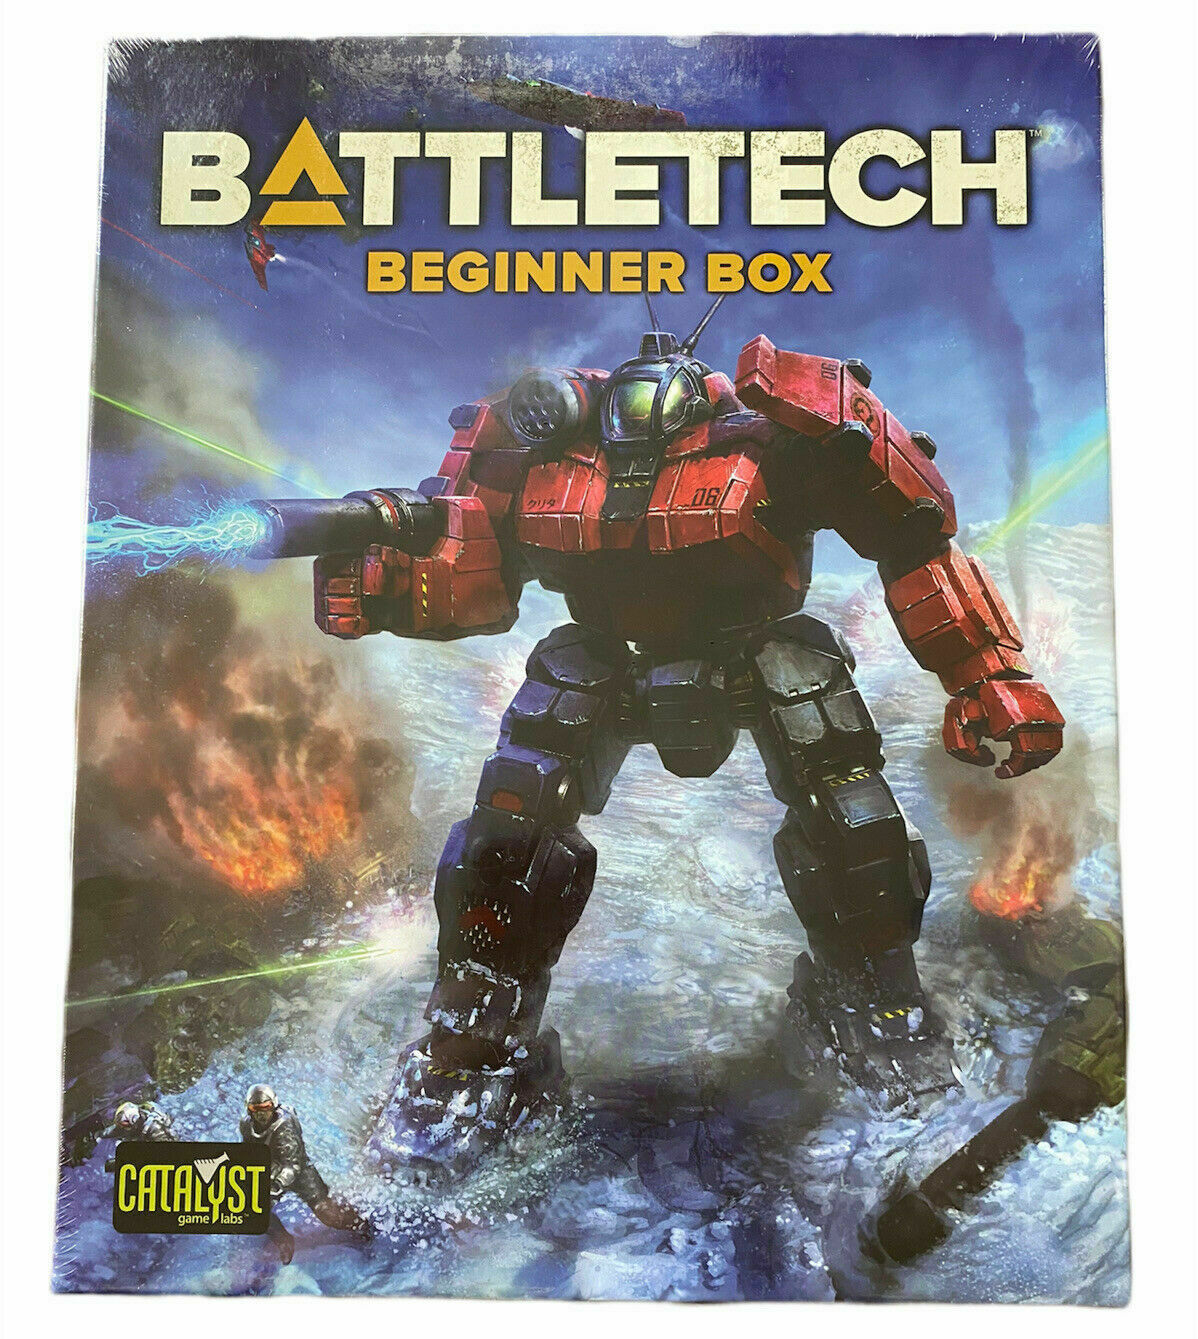 Battletech Beginner Box By Catalyst Game, Free Expedited Shipping!